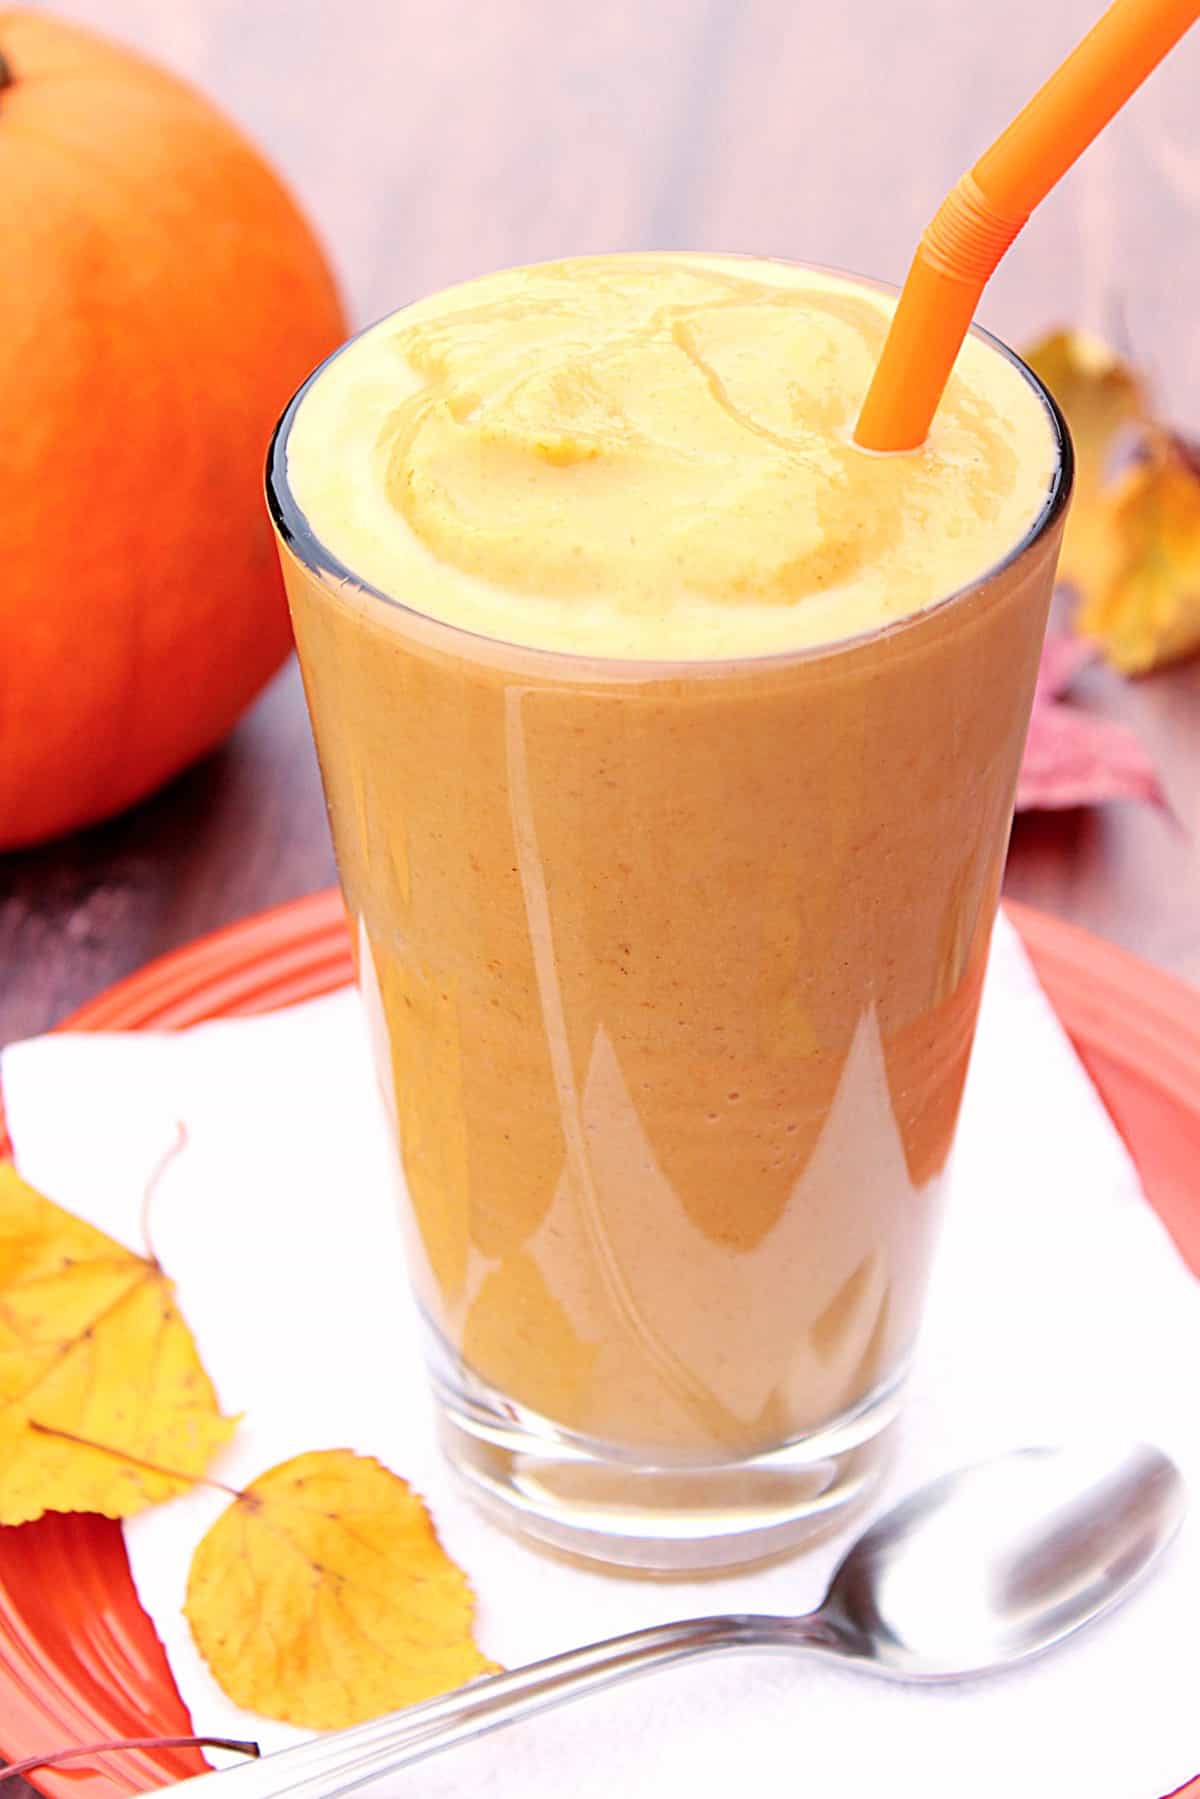 A tall glass filled with a Skinny Pumpkin Spice Malted Milkshake and an orange straw.